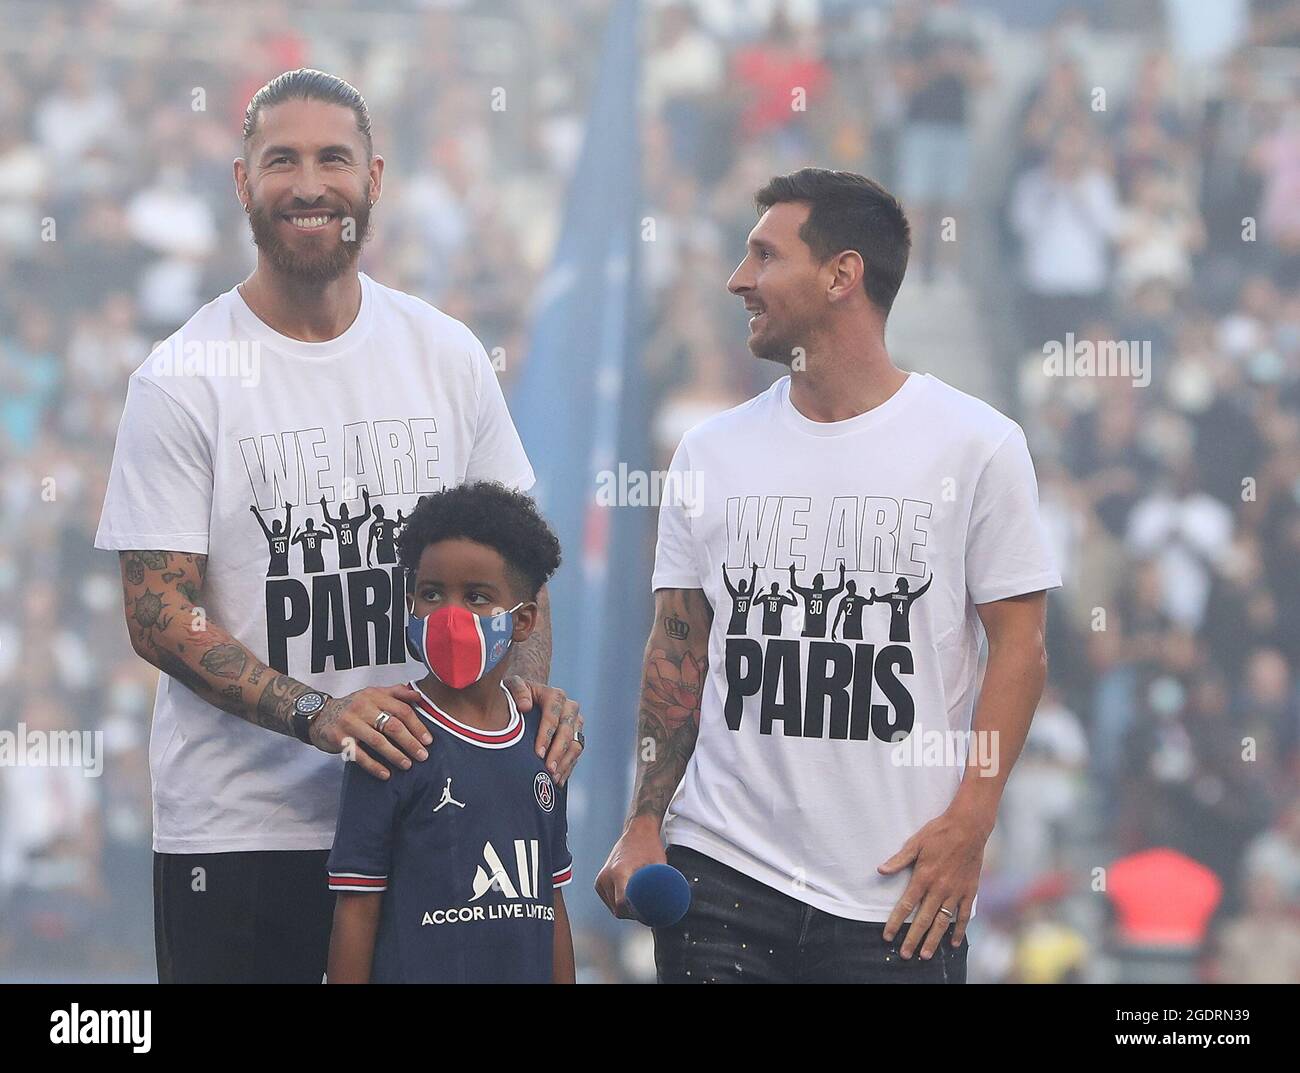 Paris, France. 14th Aug, 2021. Spanish defender Sergio Ramos (L) and Argentinian forward Lionel Messi (R) attend the new recruits presentation ceremony prior to the French Ligue 1 football match between Paris Saint-Germain and Racing Club Strasbourg at the Parc des Princes stadium in Paris, France, Aug. 14, 2021. Credit: Gao Jing/Xinhua/Alamy Live News Stock Photo